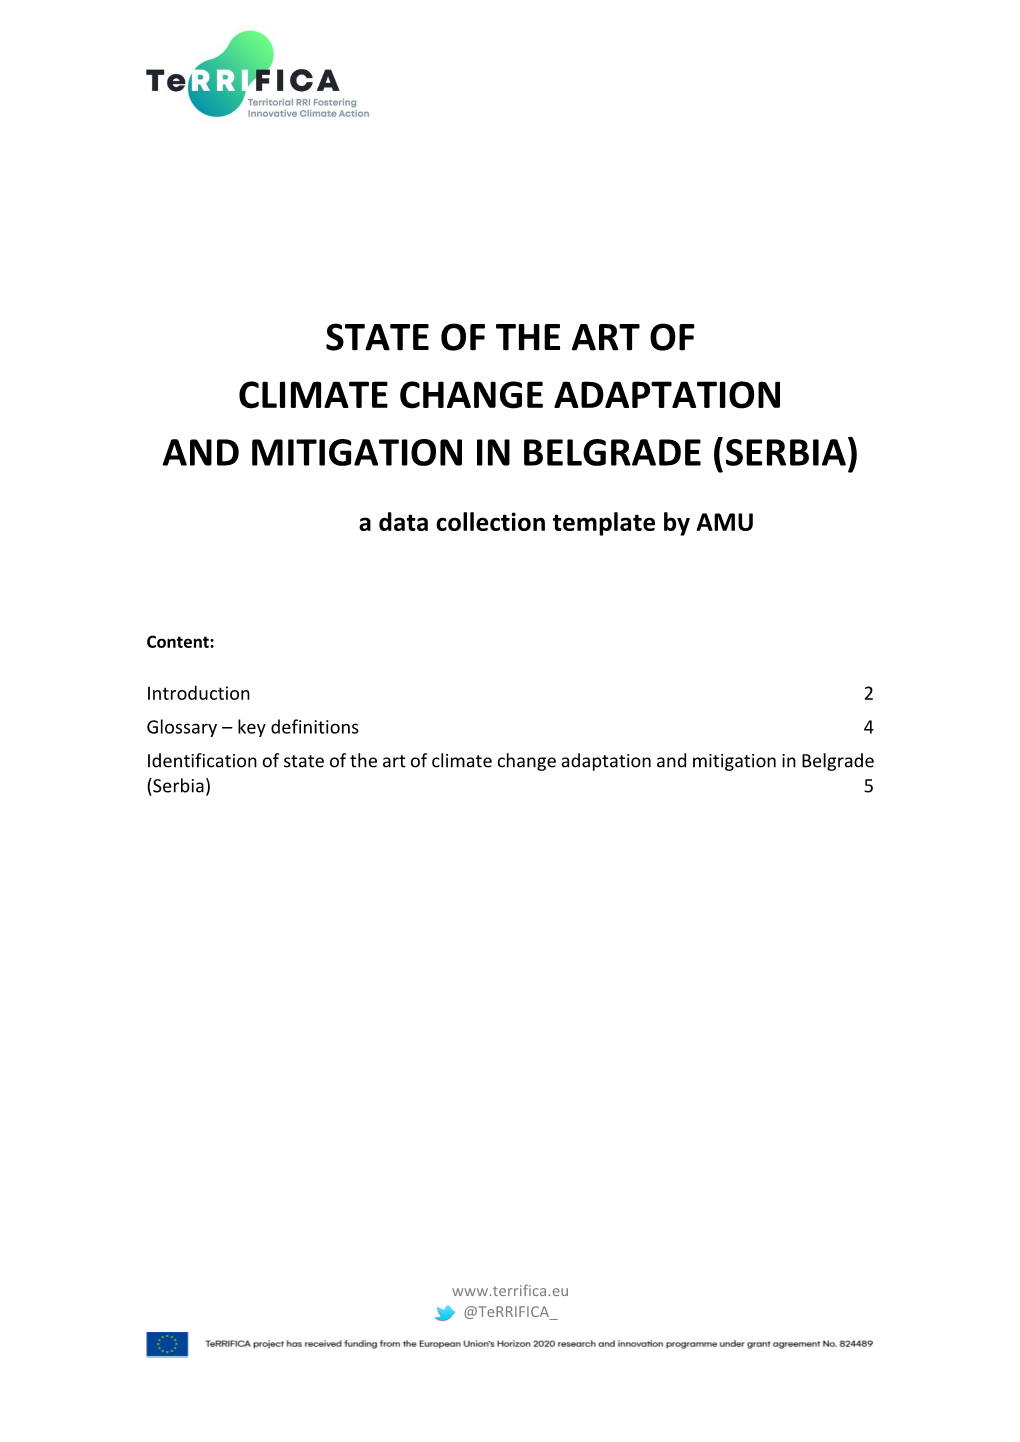 State of the Art of Climate Change Adaptation and Mitigation in Belgrade (Serbia)